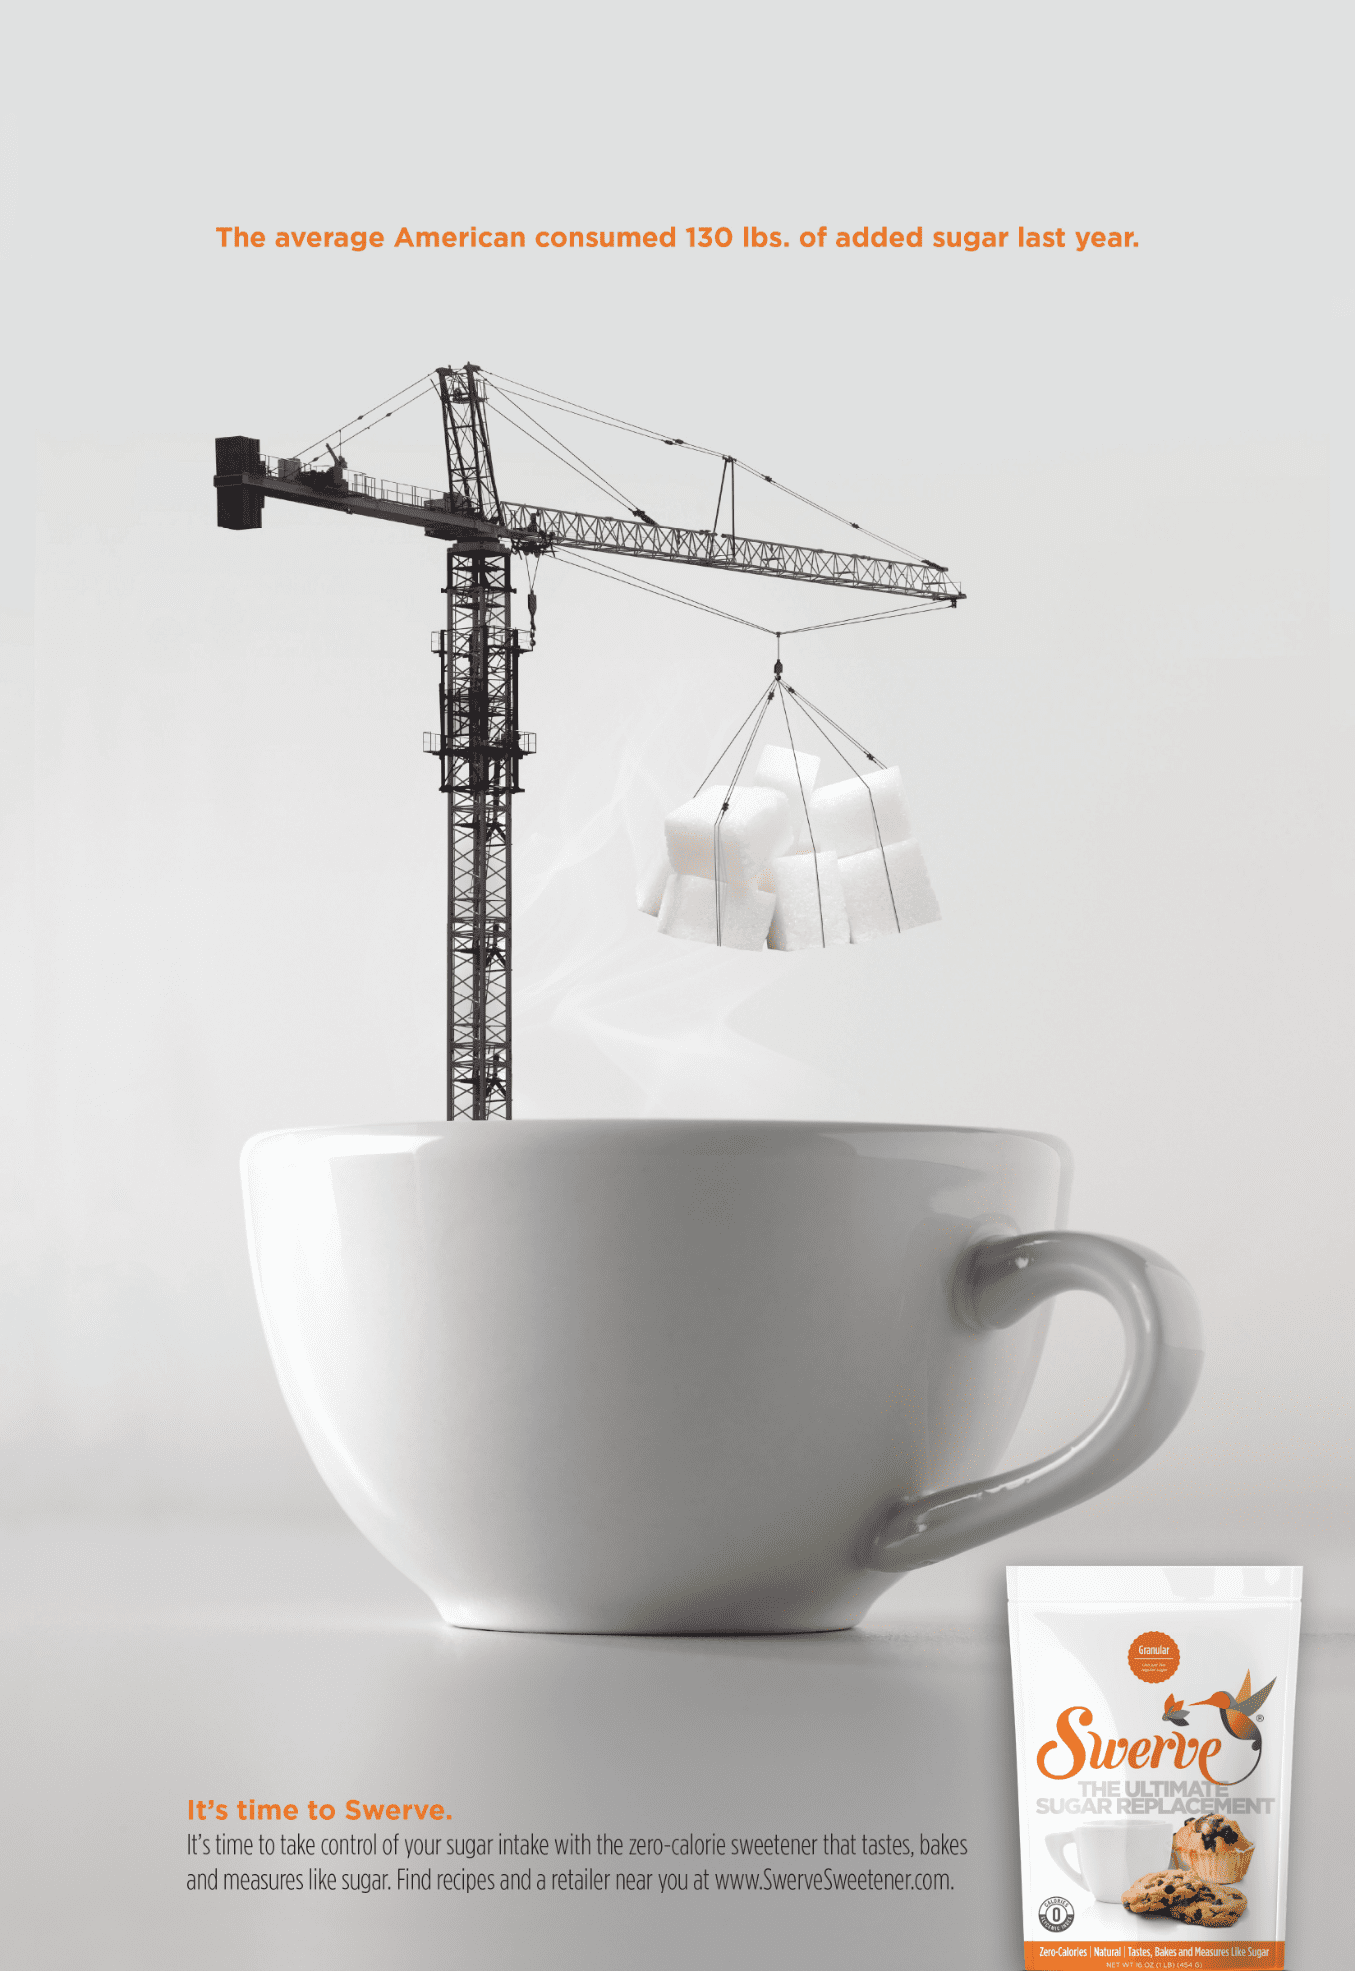 ad for swerve sweetener of a crane dropping sugar into cup